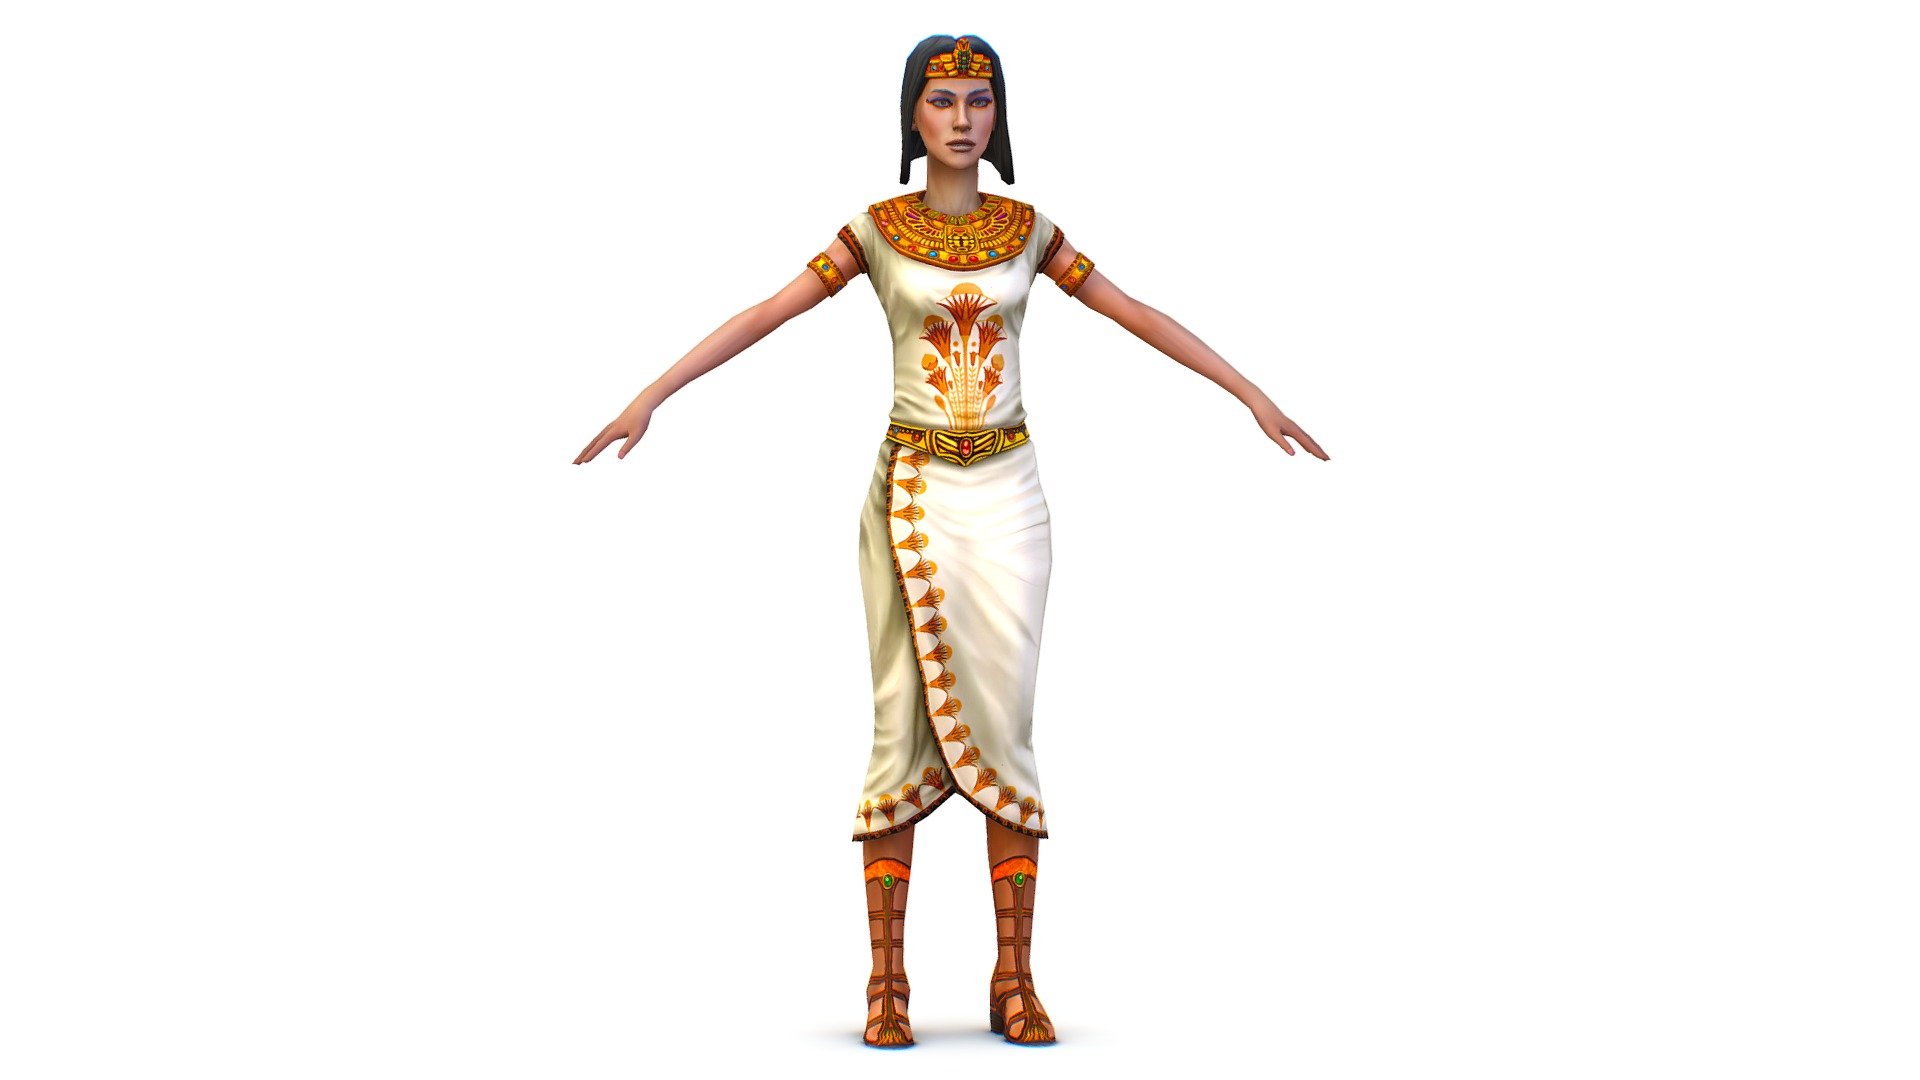 1 color textures 4096x4096

2100 poly count


3dsMax / Maya file included




Support me on Patreon, please - https://www.patreon.com/art_book


 - Young Girl dressed Egyptian Priestess, Aphrodite - Buy Royalty Free 3D model by Oleg Shuldiakov (@olegshuldiakov) 3d model